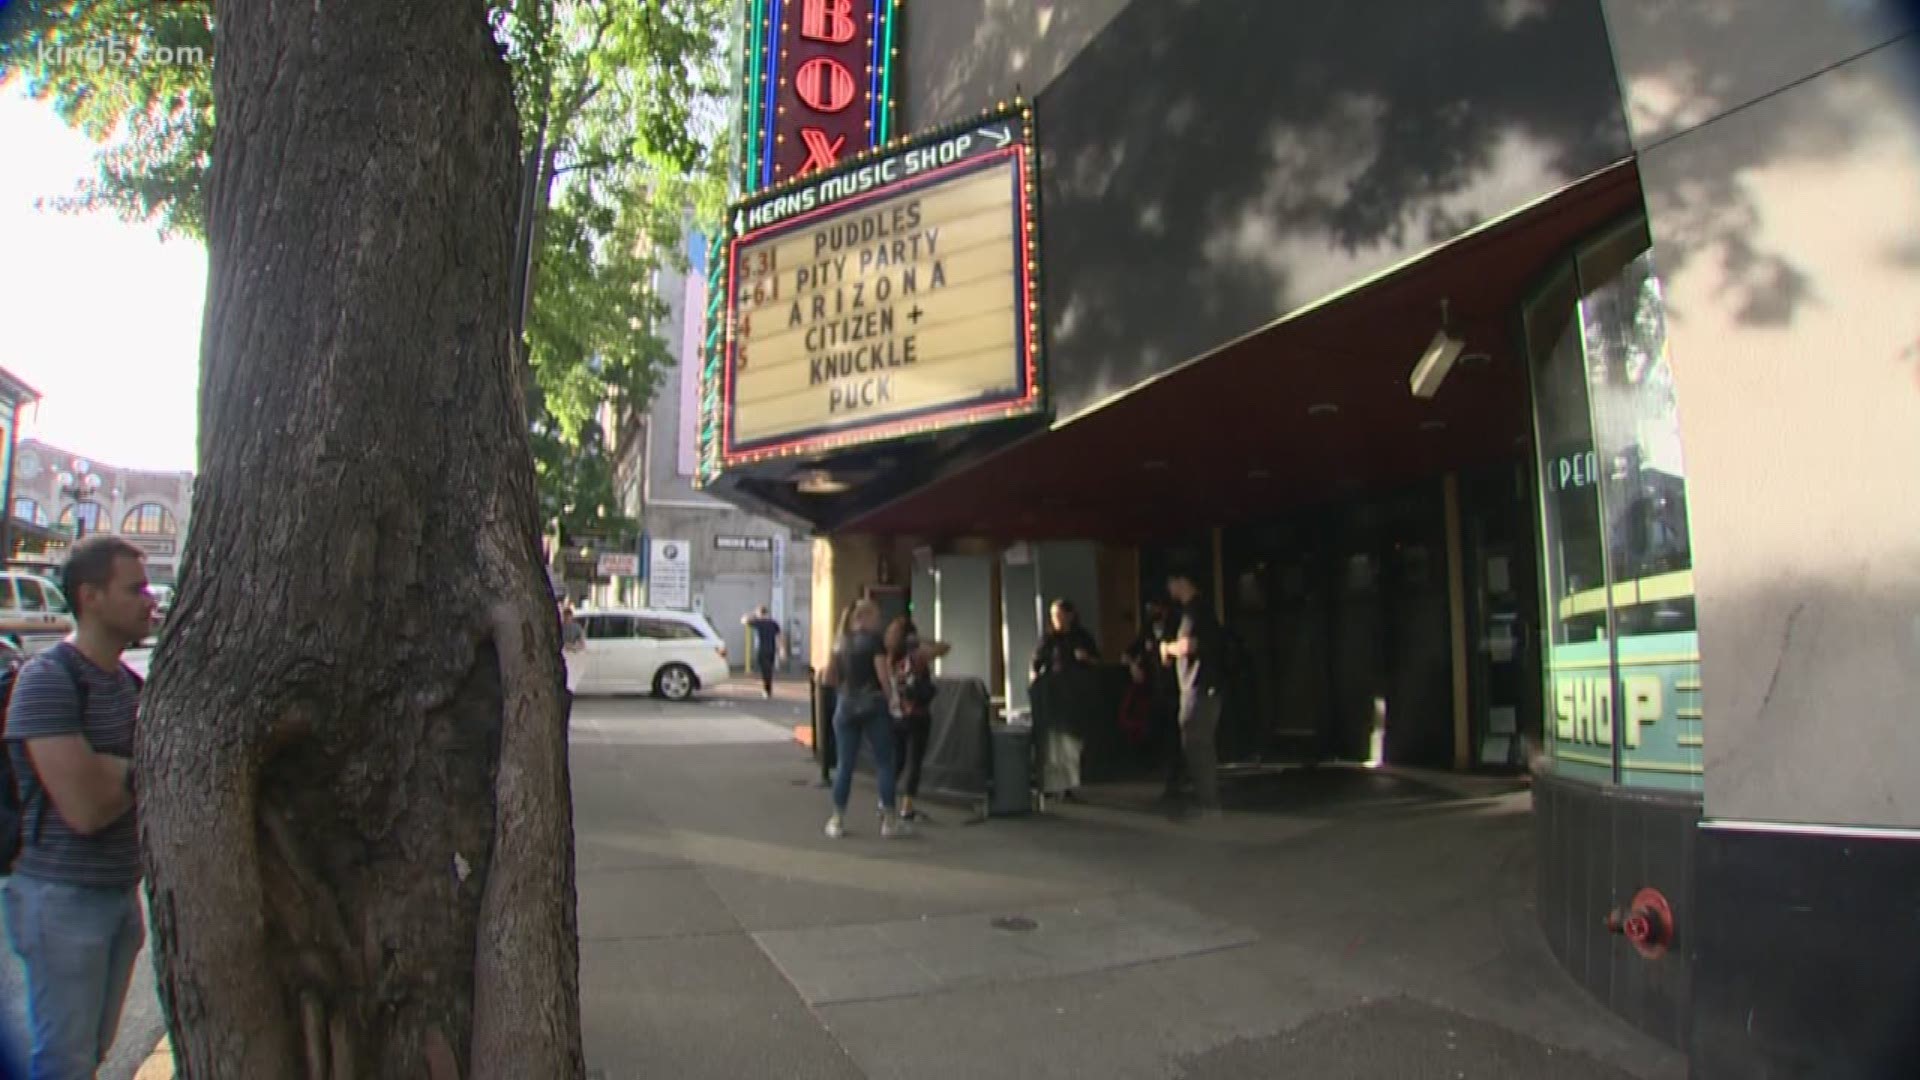 Showbox supporters want a six-month extension on the temporary protections that have kept the iconic Seattle music venue safe from development. Tuesday, they rallied at City Hall and made their case to the council. KING 5's Natalie Swaby has the story.